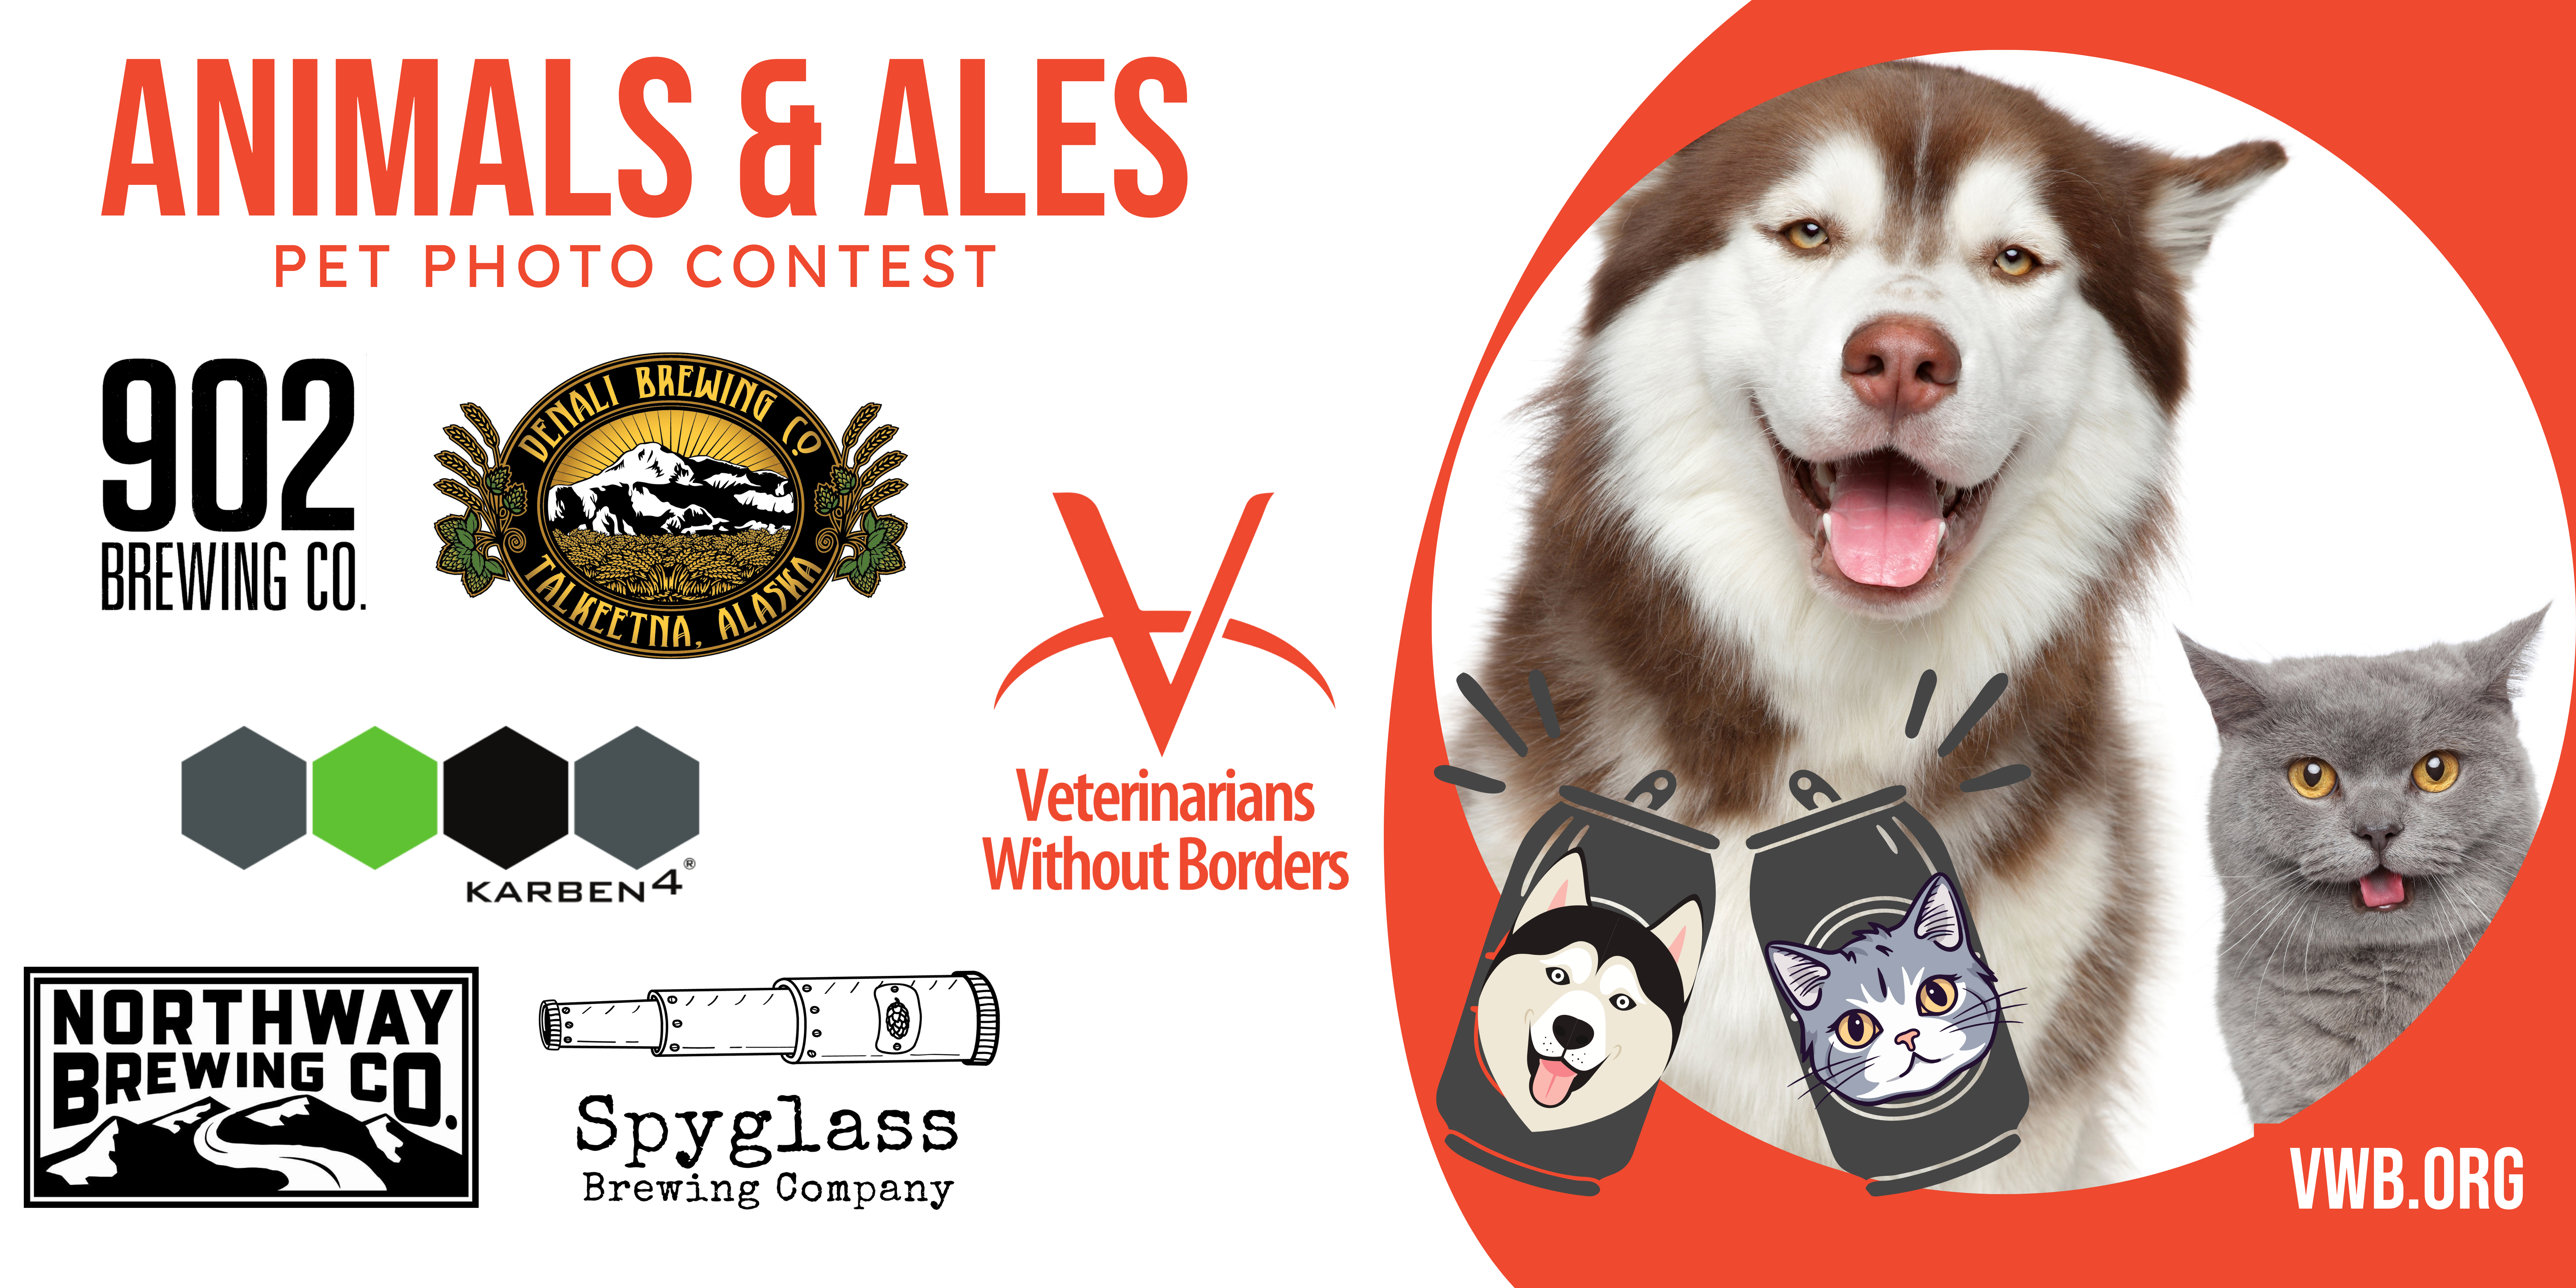 US animals & ales banner - all